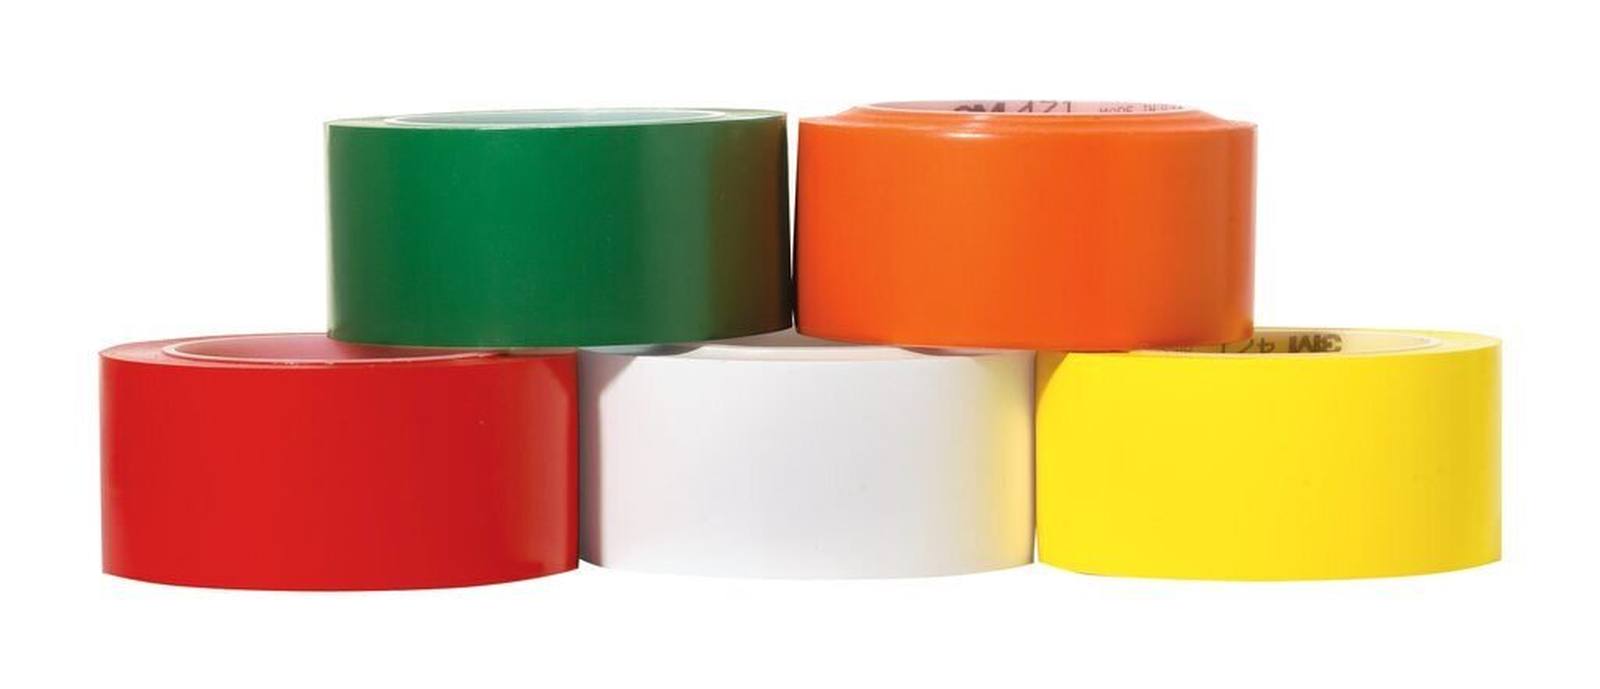 3M soft PVC adhesive tape 471 F, yellow, 50 mm x 33 m, 0.13 mm, individually and practically packed